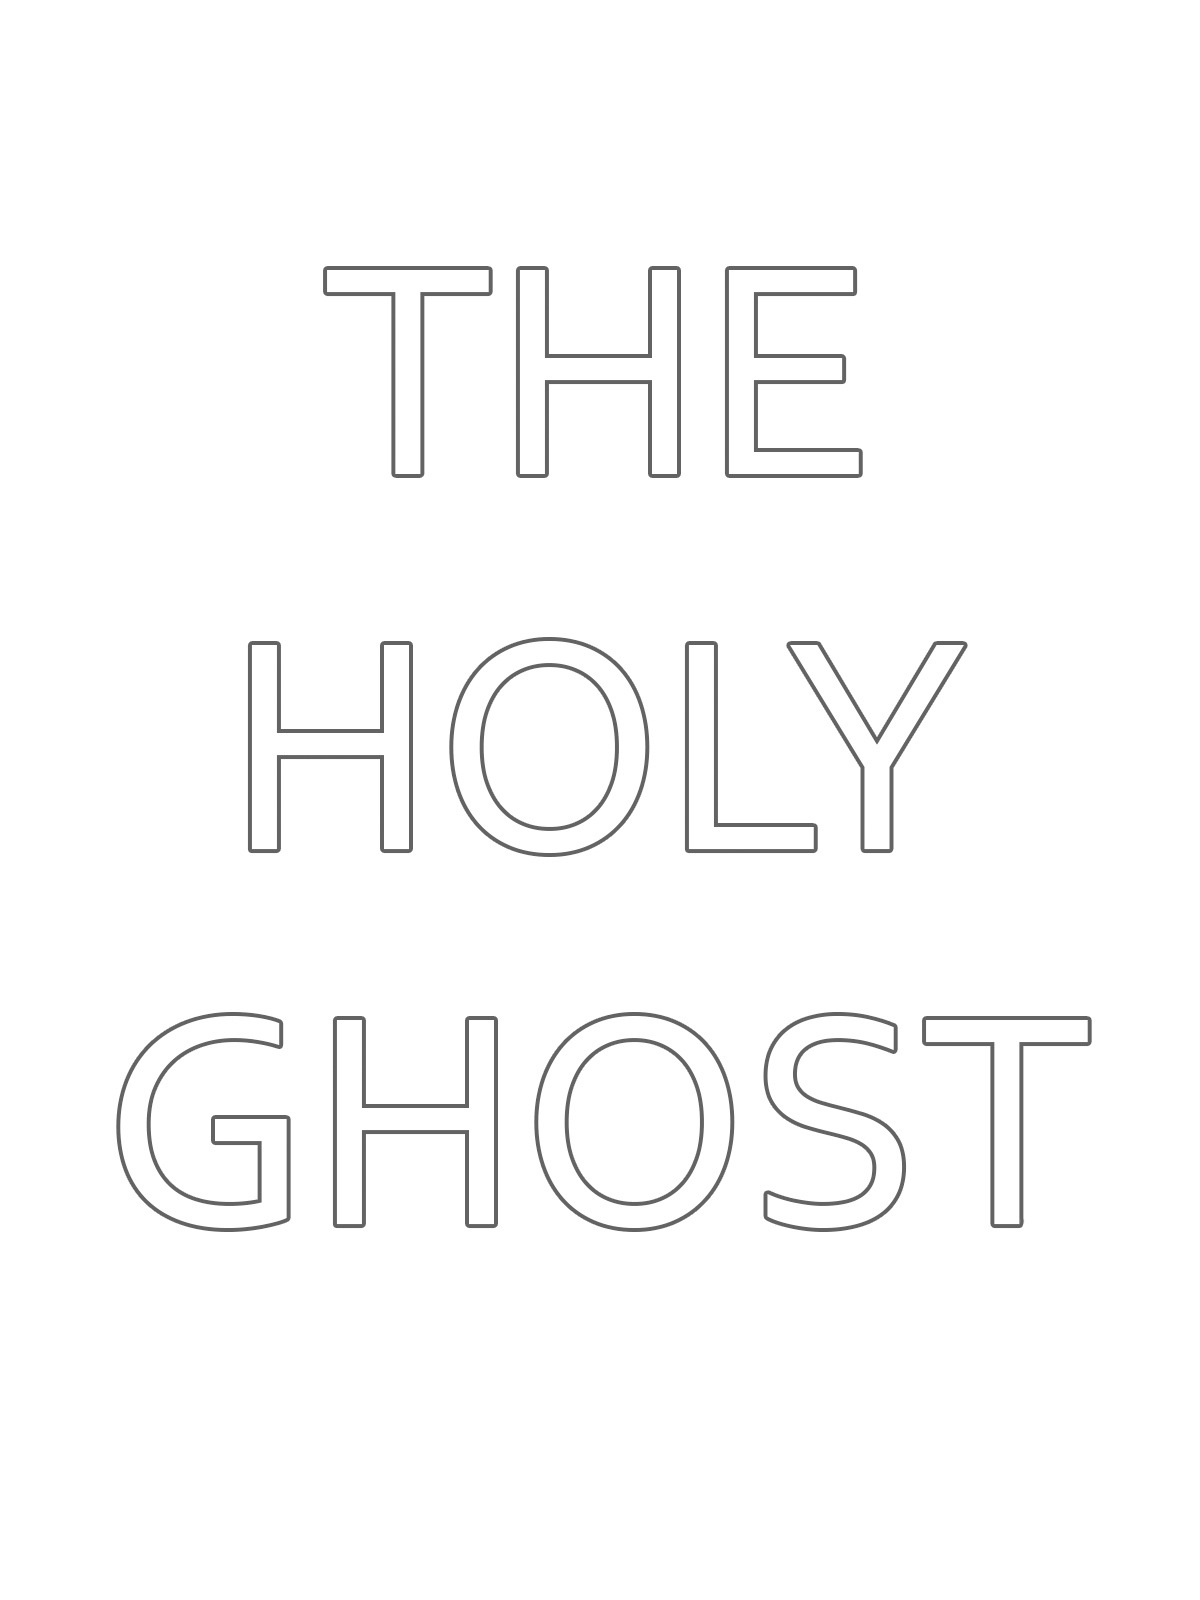 An illustration of the Holy Ghost.